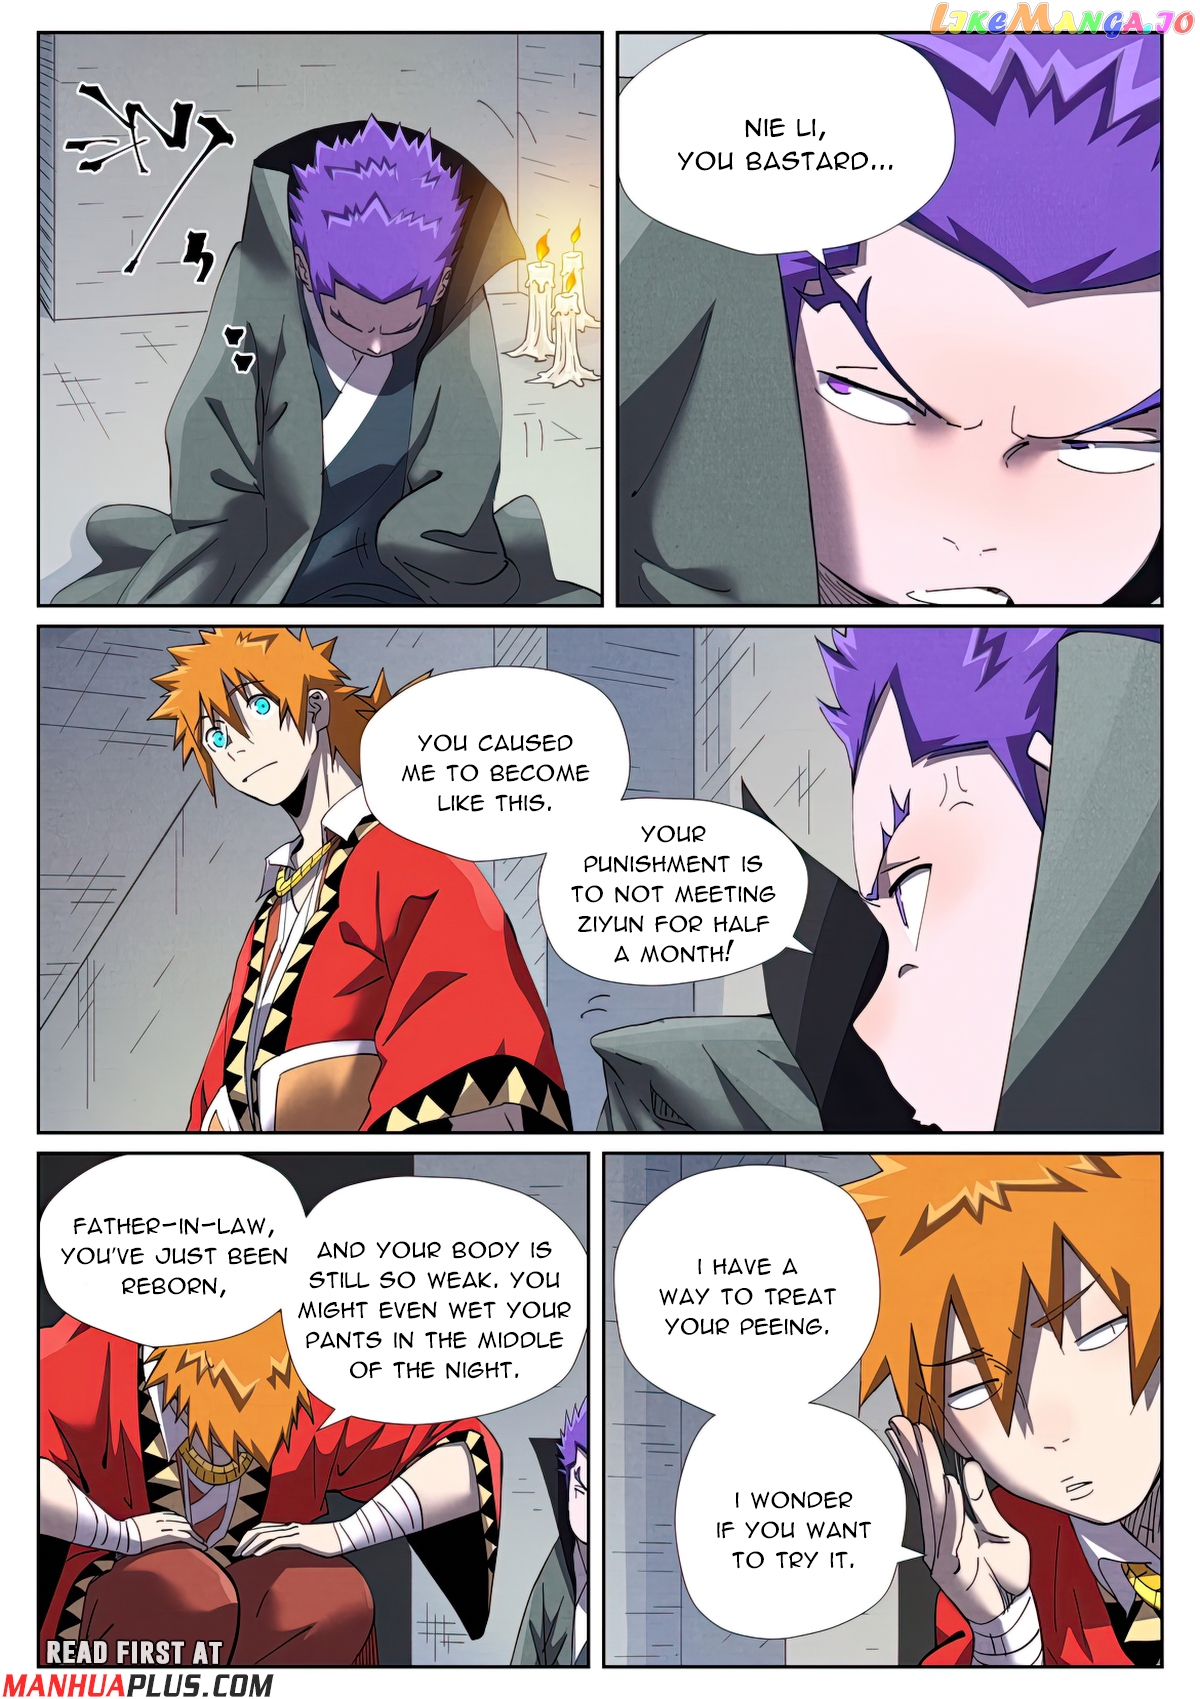 Tales of Demons and Gods Manhua Chapter 456.5 - Page 4